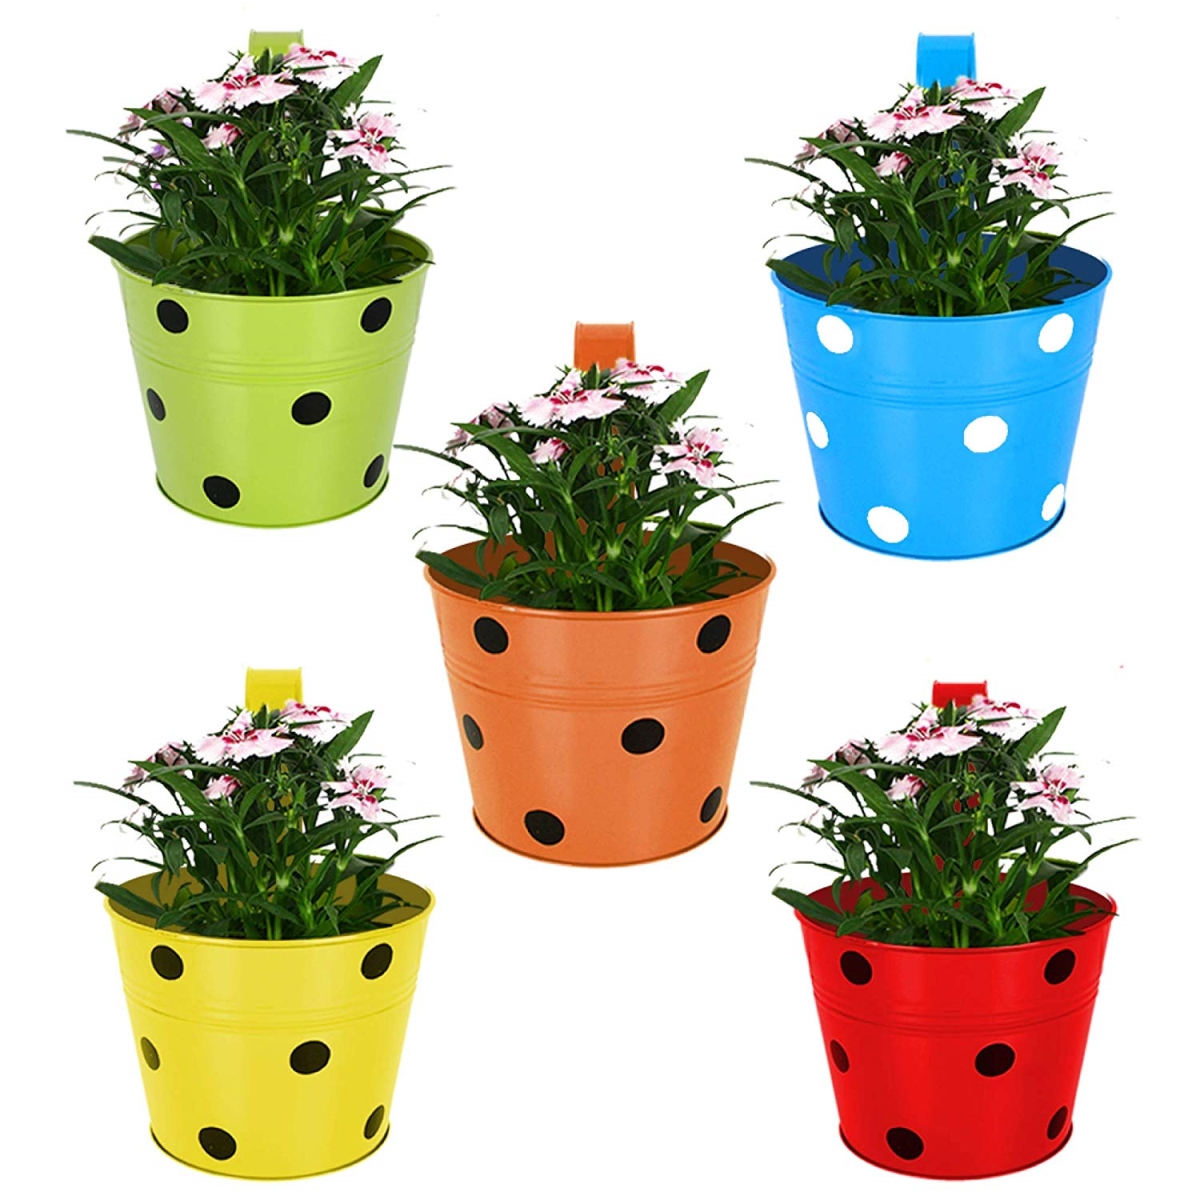 225964 8.3 X 6.4 In. Round Duo Planter, Grafite - Pack Of 10